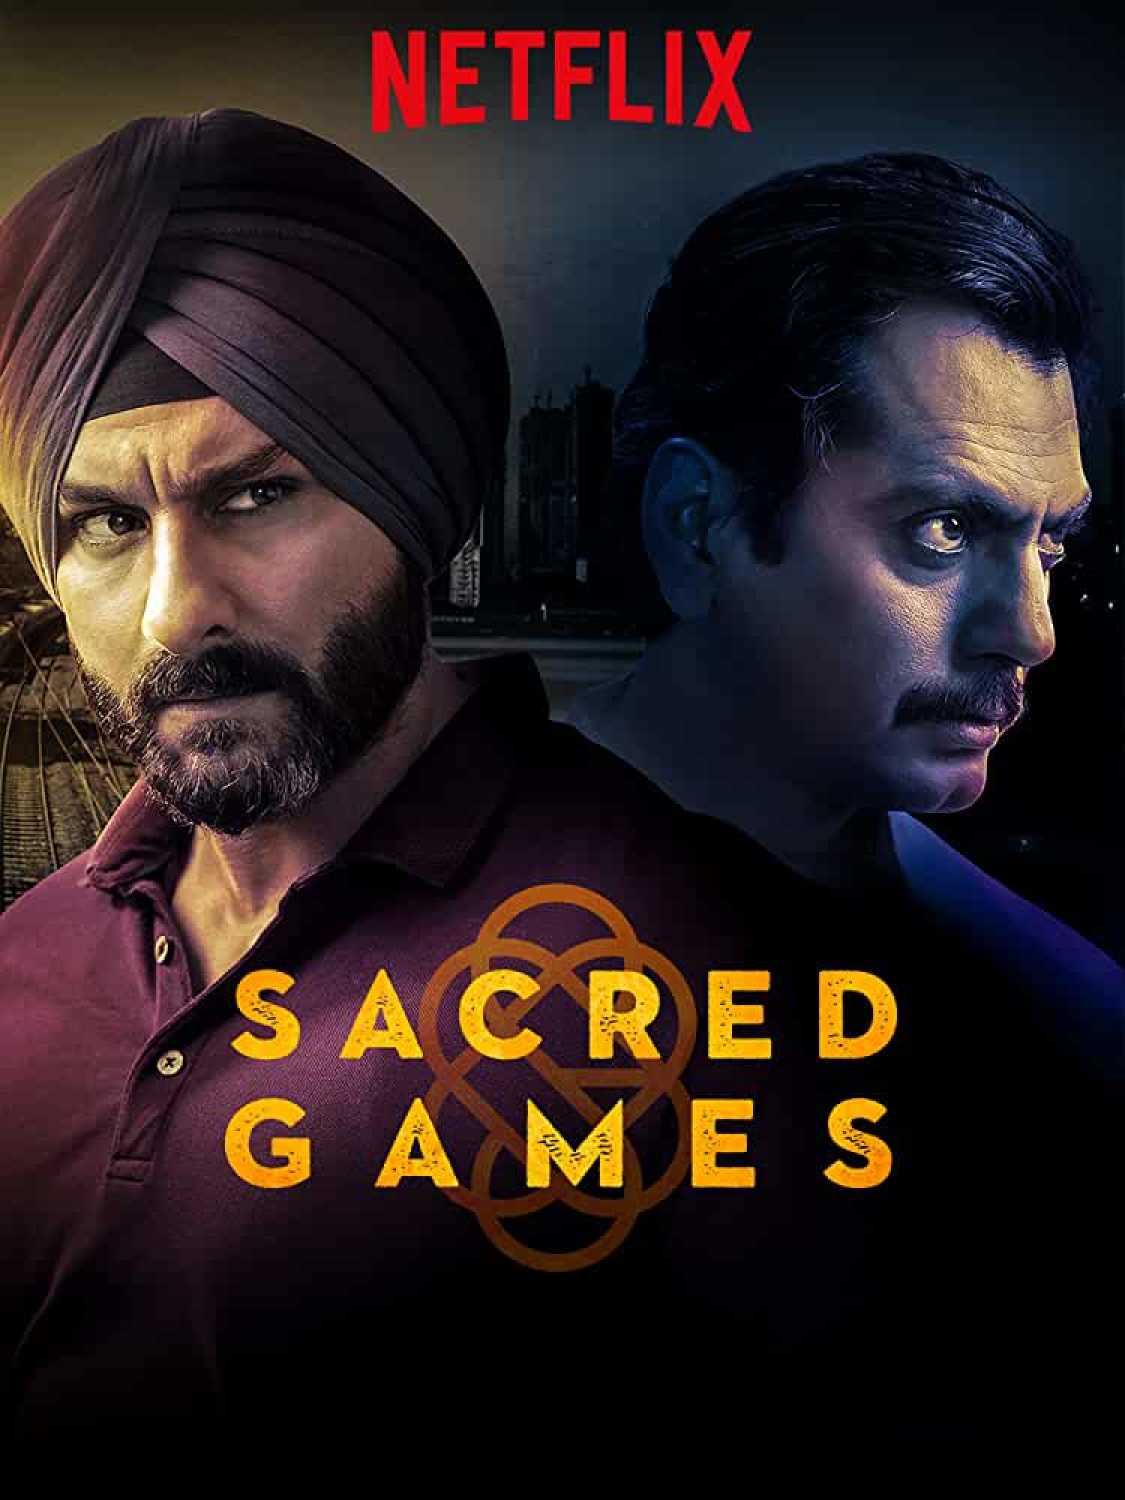 Index of Sacred Games Season 1 & Season 2 (Review, Cast & Episodes)